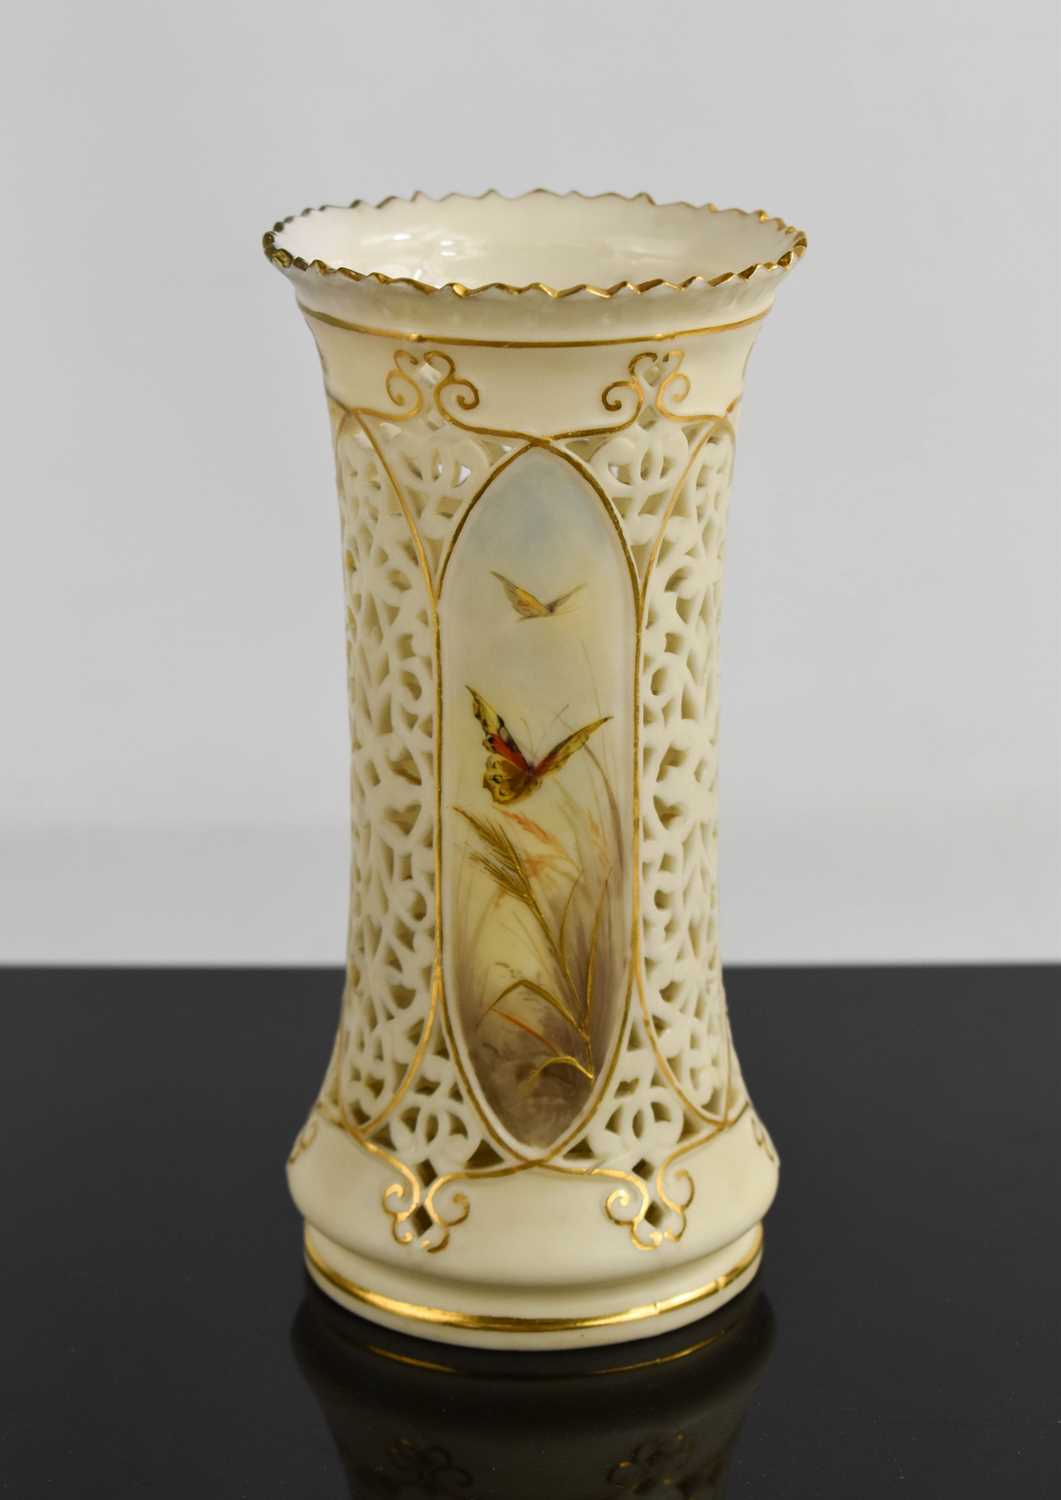 A 19th century Royal Worcester ivory vase with pierced decoration, with three panels painted with